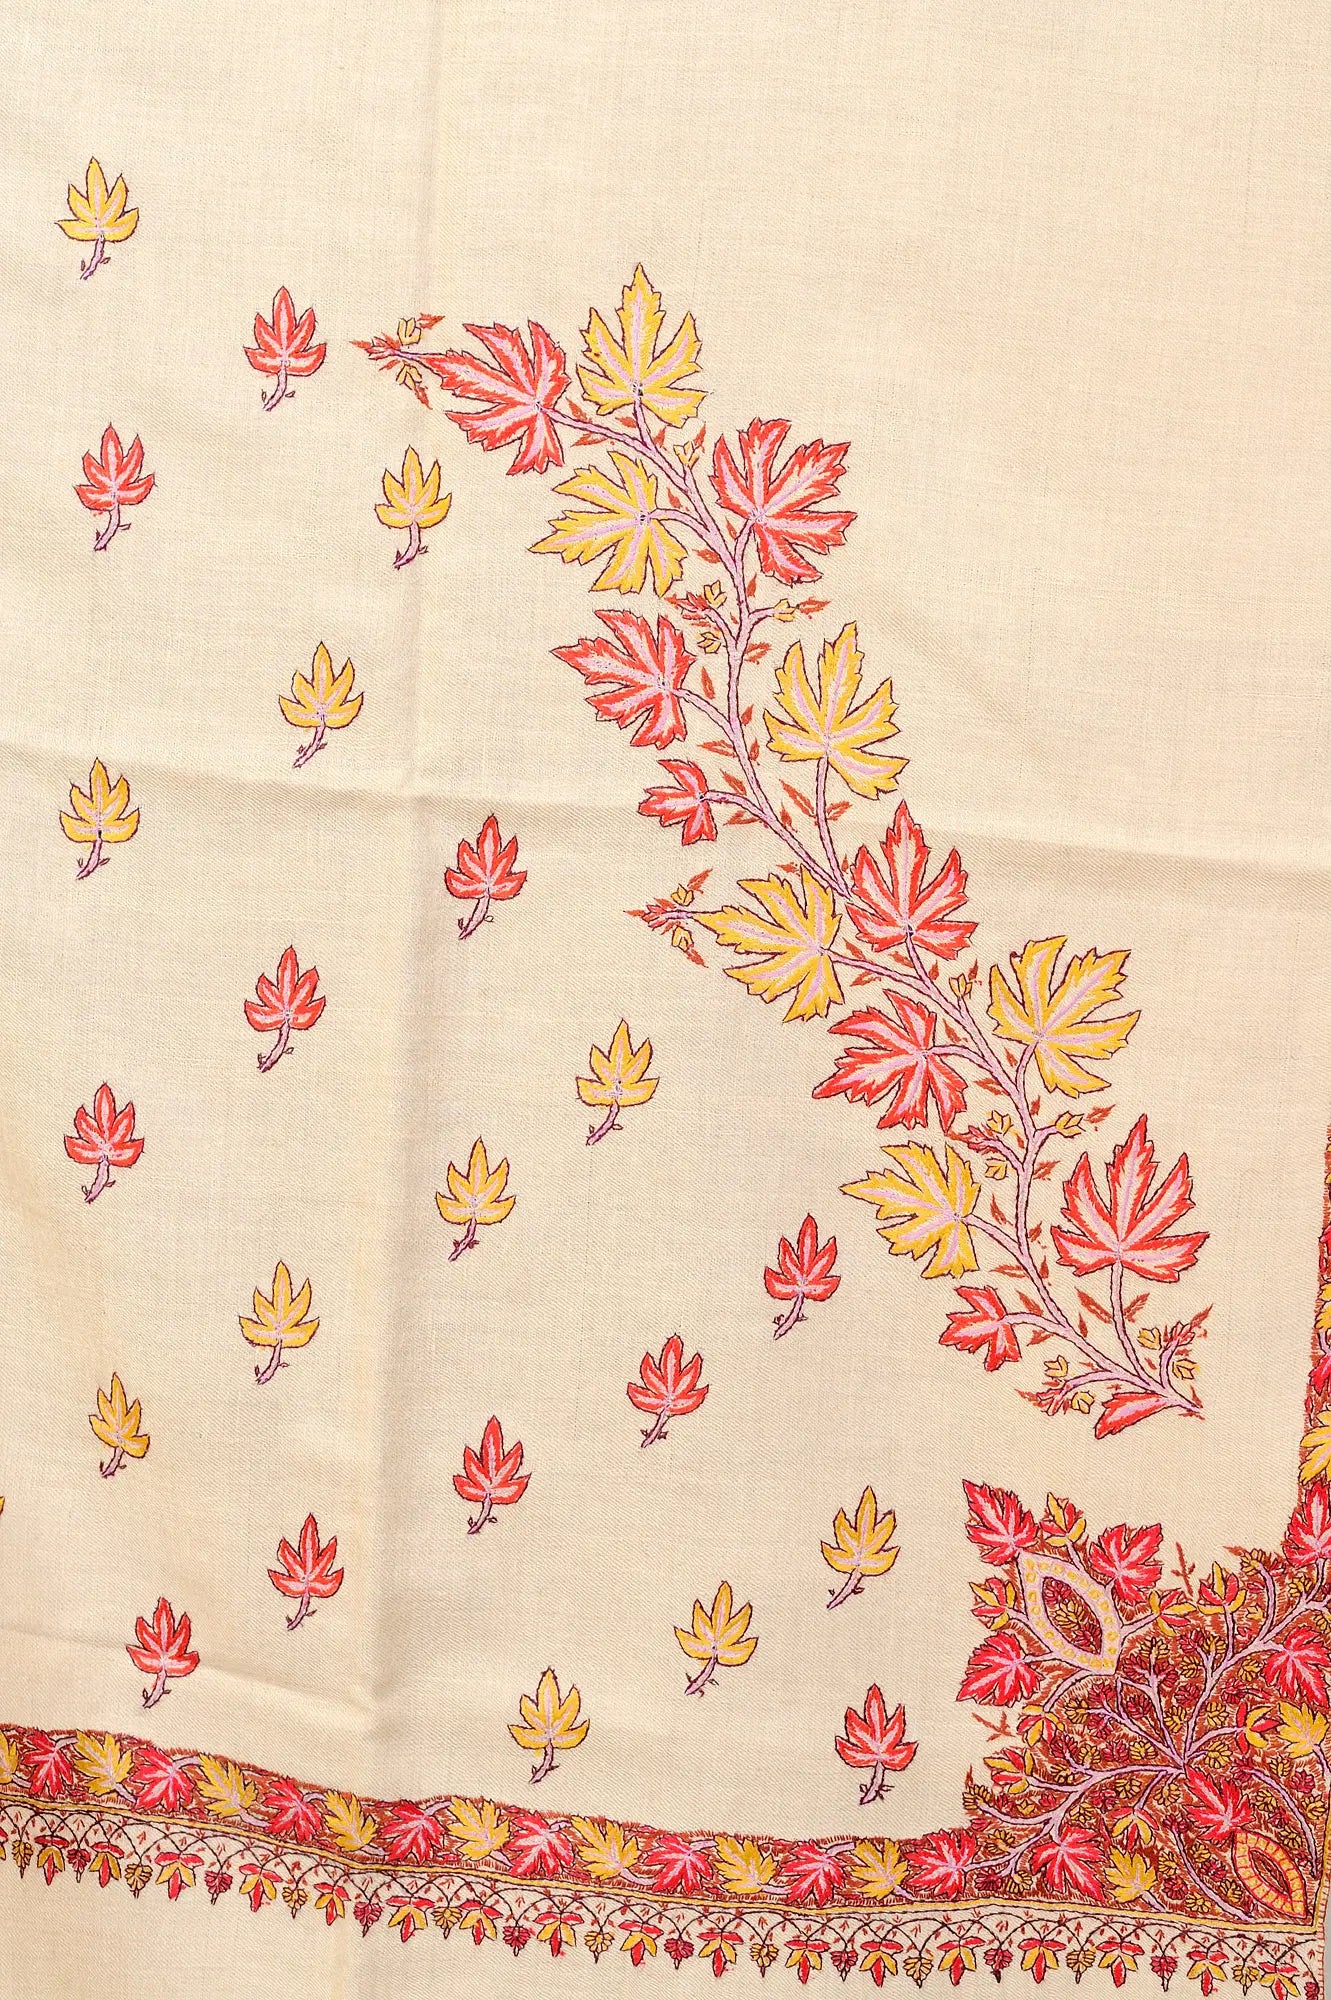 Almond-Buff Pashmina Shawl from Kashmir with Hand Embroidered Maple Leaves